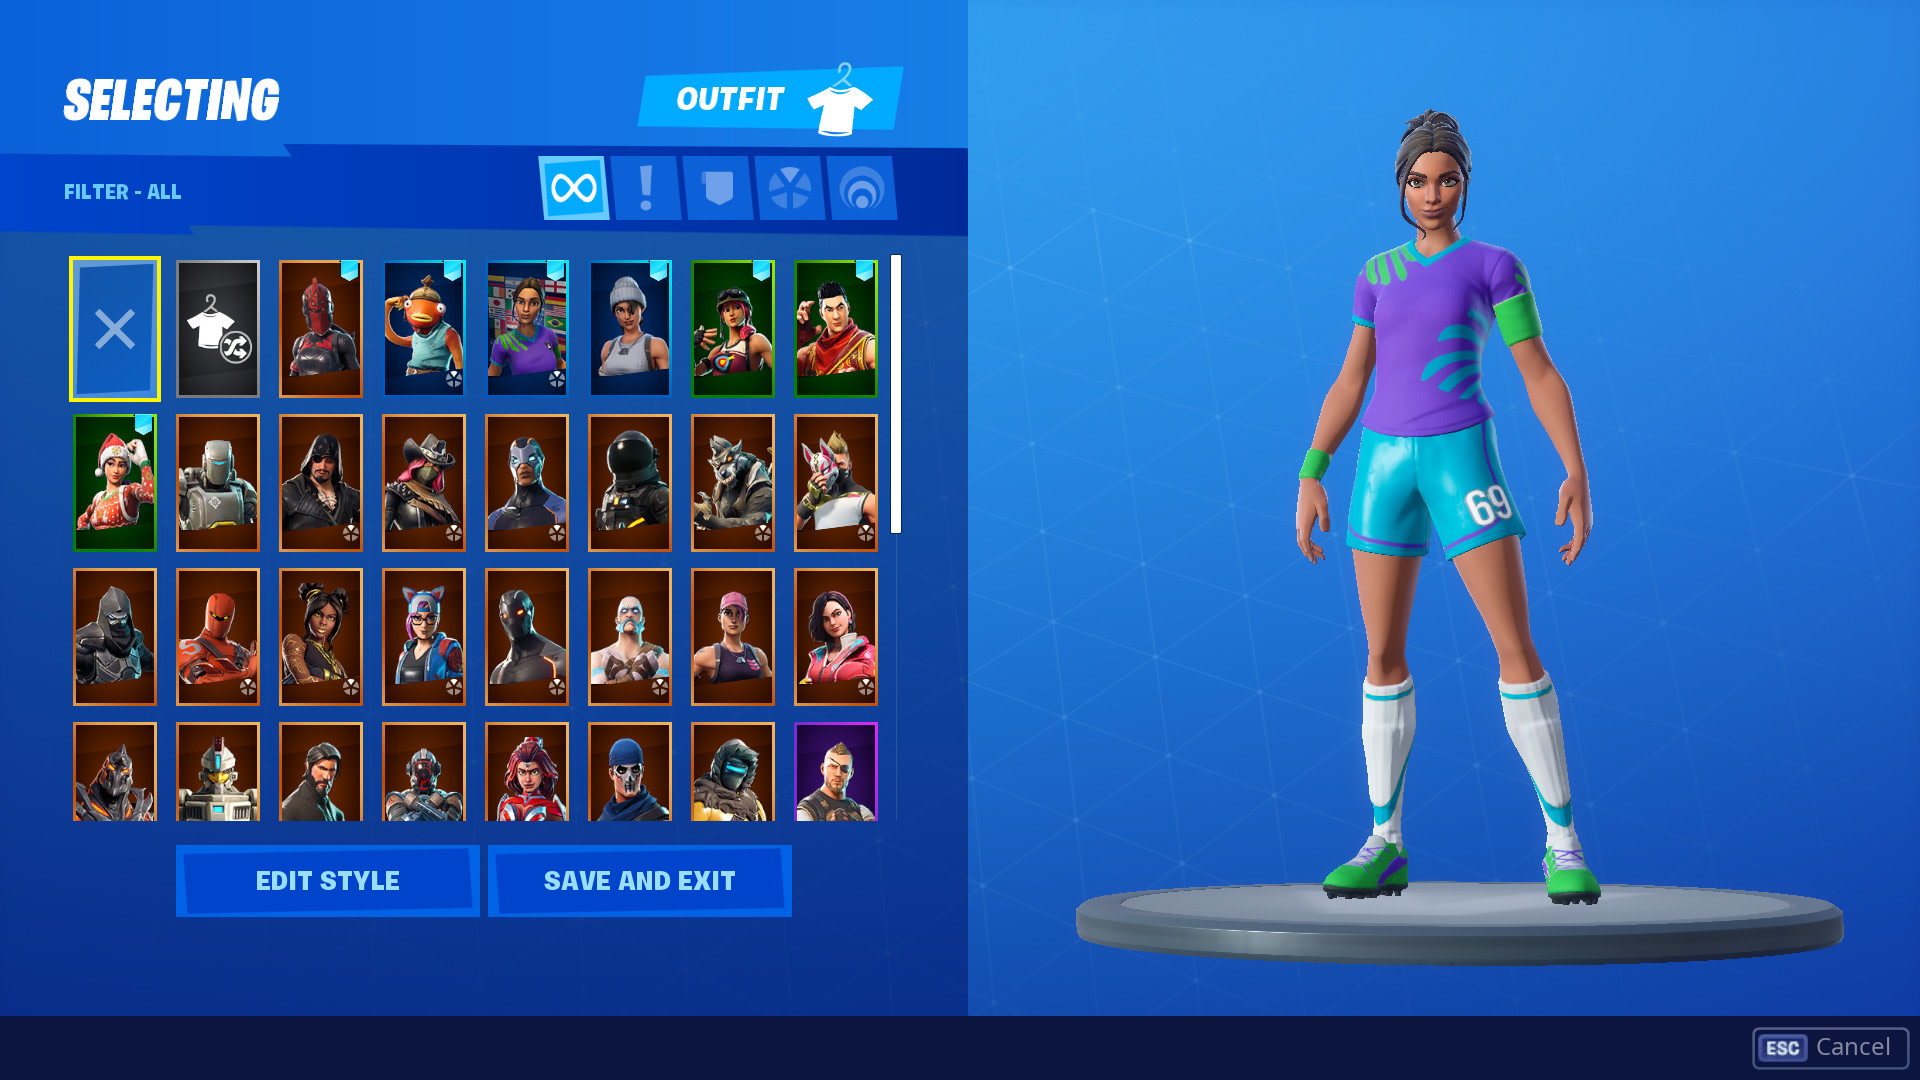 Fortnite Account Stats And Skins Give You This Fortnite Accoutn With Lots Of Skins And Good Stats By Horpatrick Fiverr